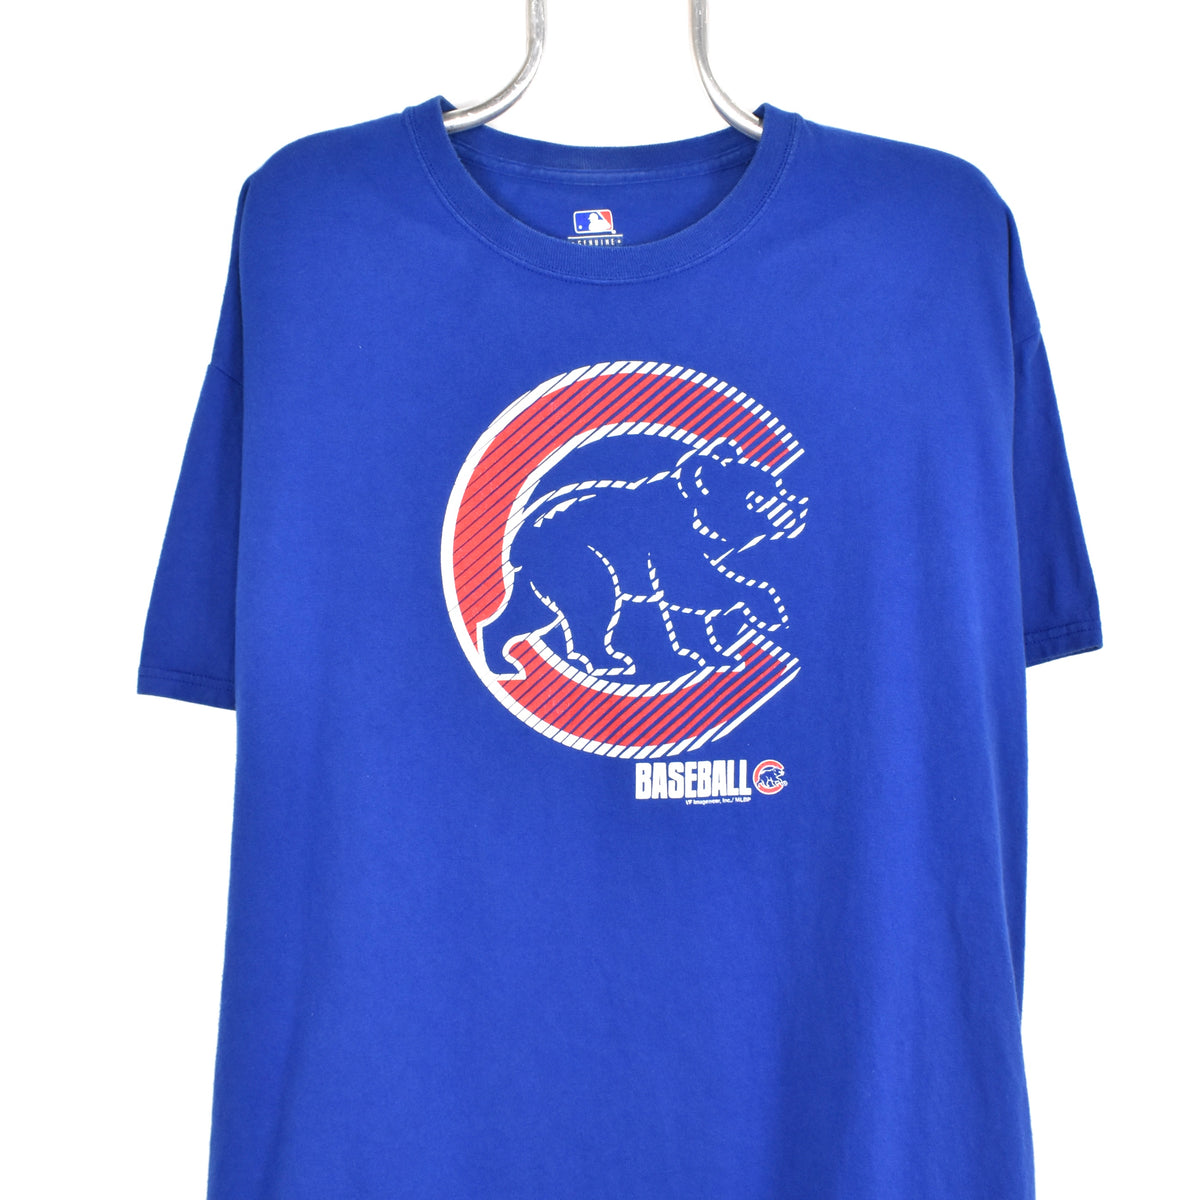 Modern Chicago Cubs shirt, MLB navy blue graphic tee - Large